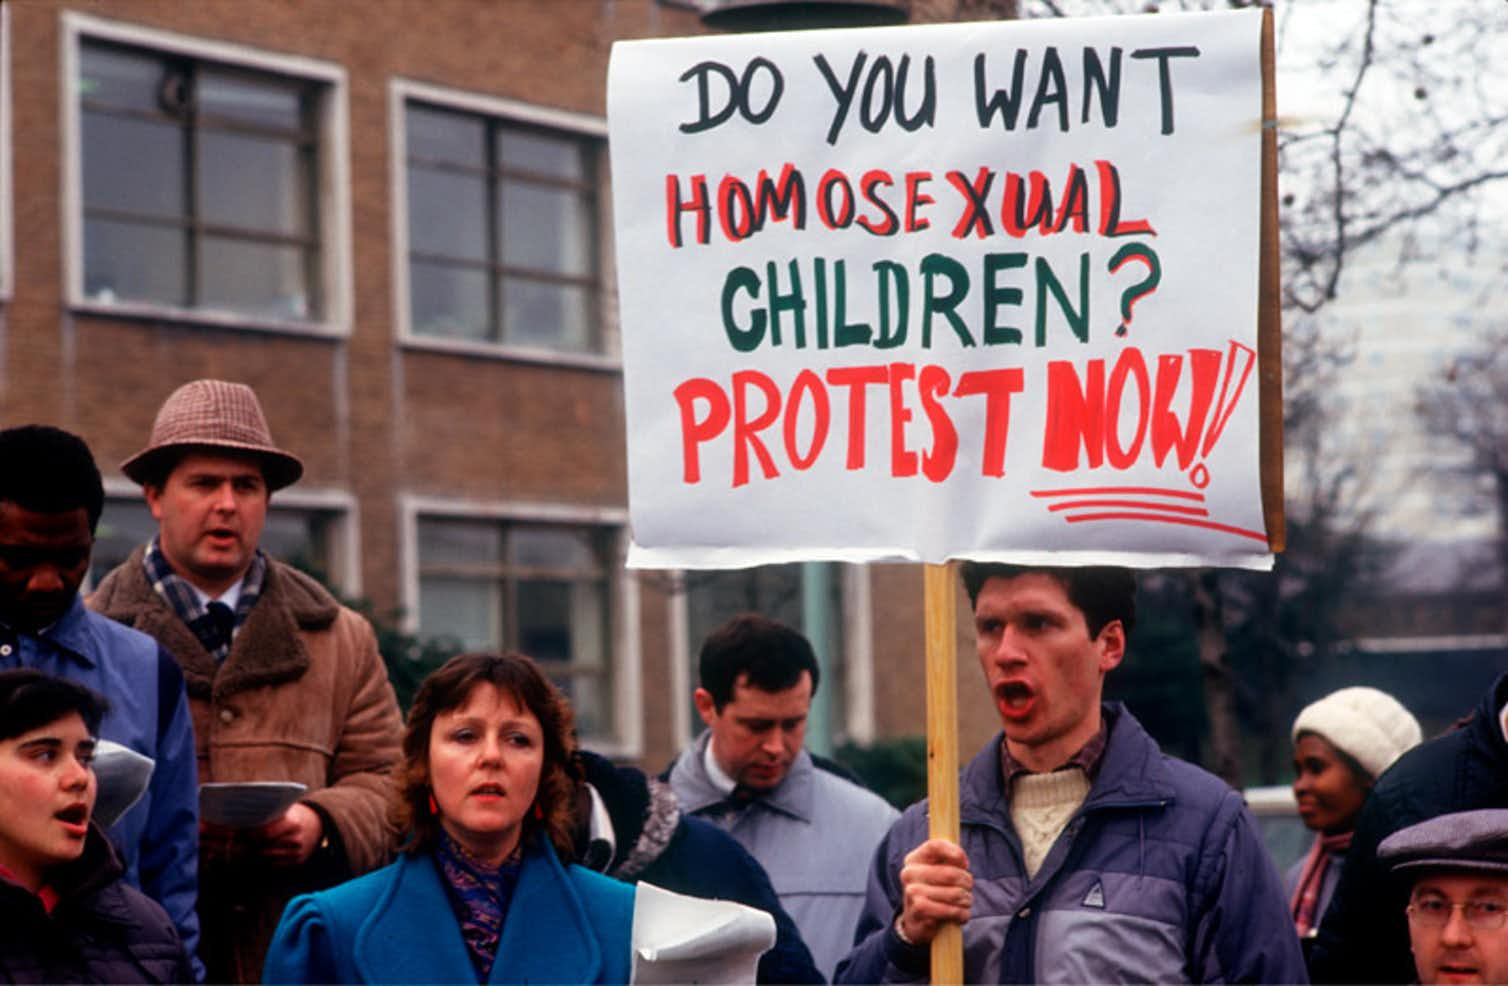 The Christian right has always protested against inclusive sex education - such as in this 1987 image from the UK - but opposition has grown with the US pro-family movement. Image: David Hoffman/FLICKR 